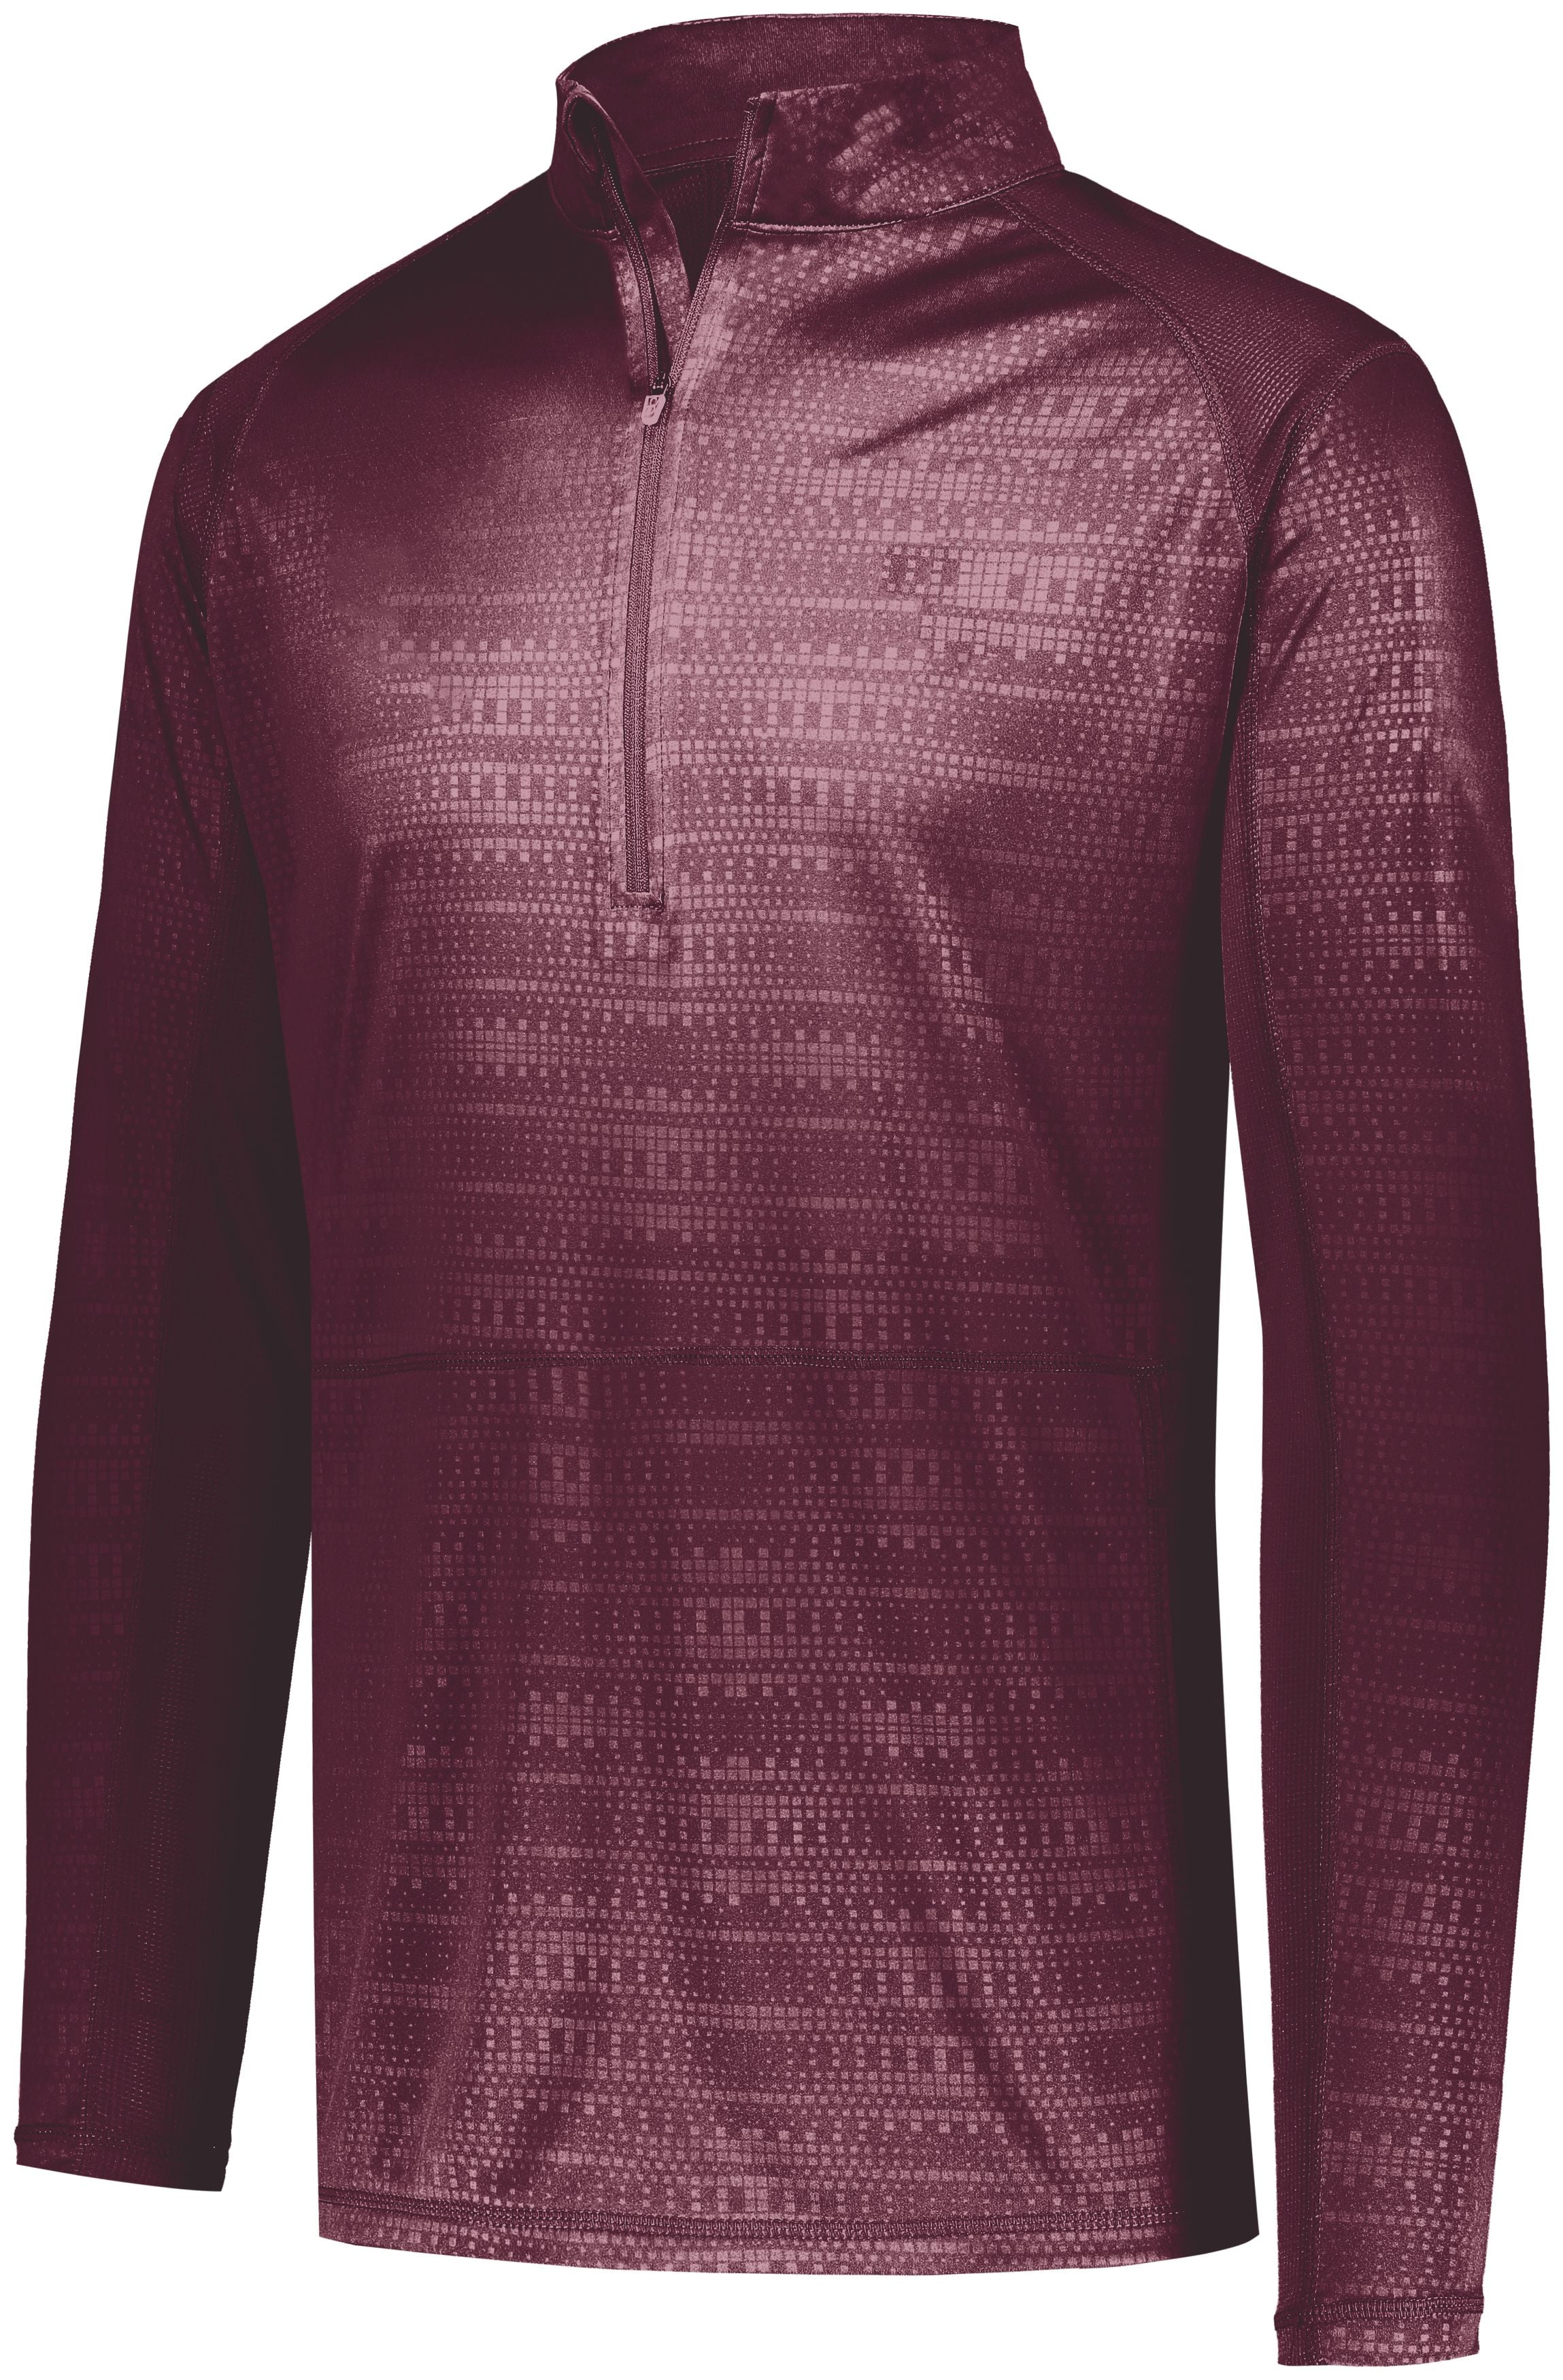 Holloway Converge 1/2 Zip Pullover in Maroon (Hlw)  -Part of the Adult, Holloway, Shirts, Corporate-Collection, Converge-Collection product lines at KanaleyCreations.com